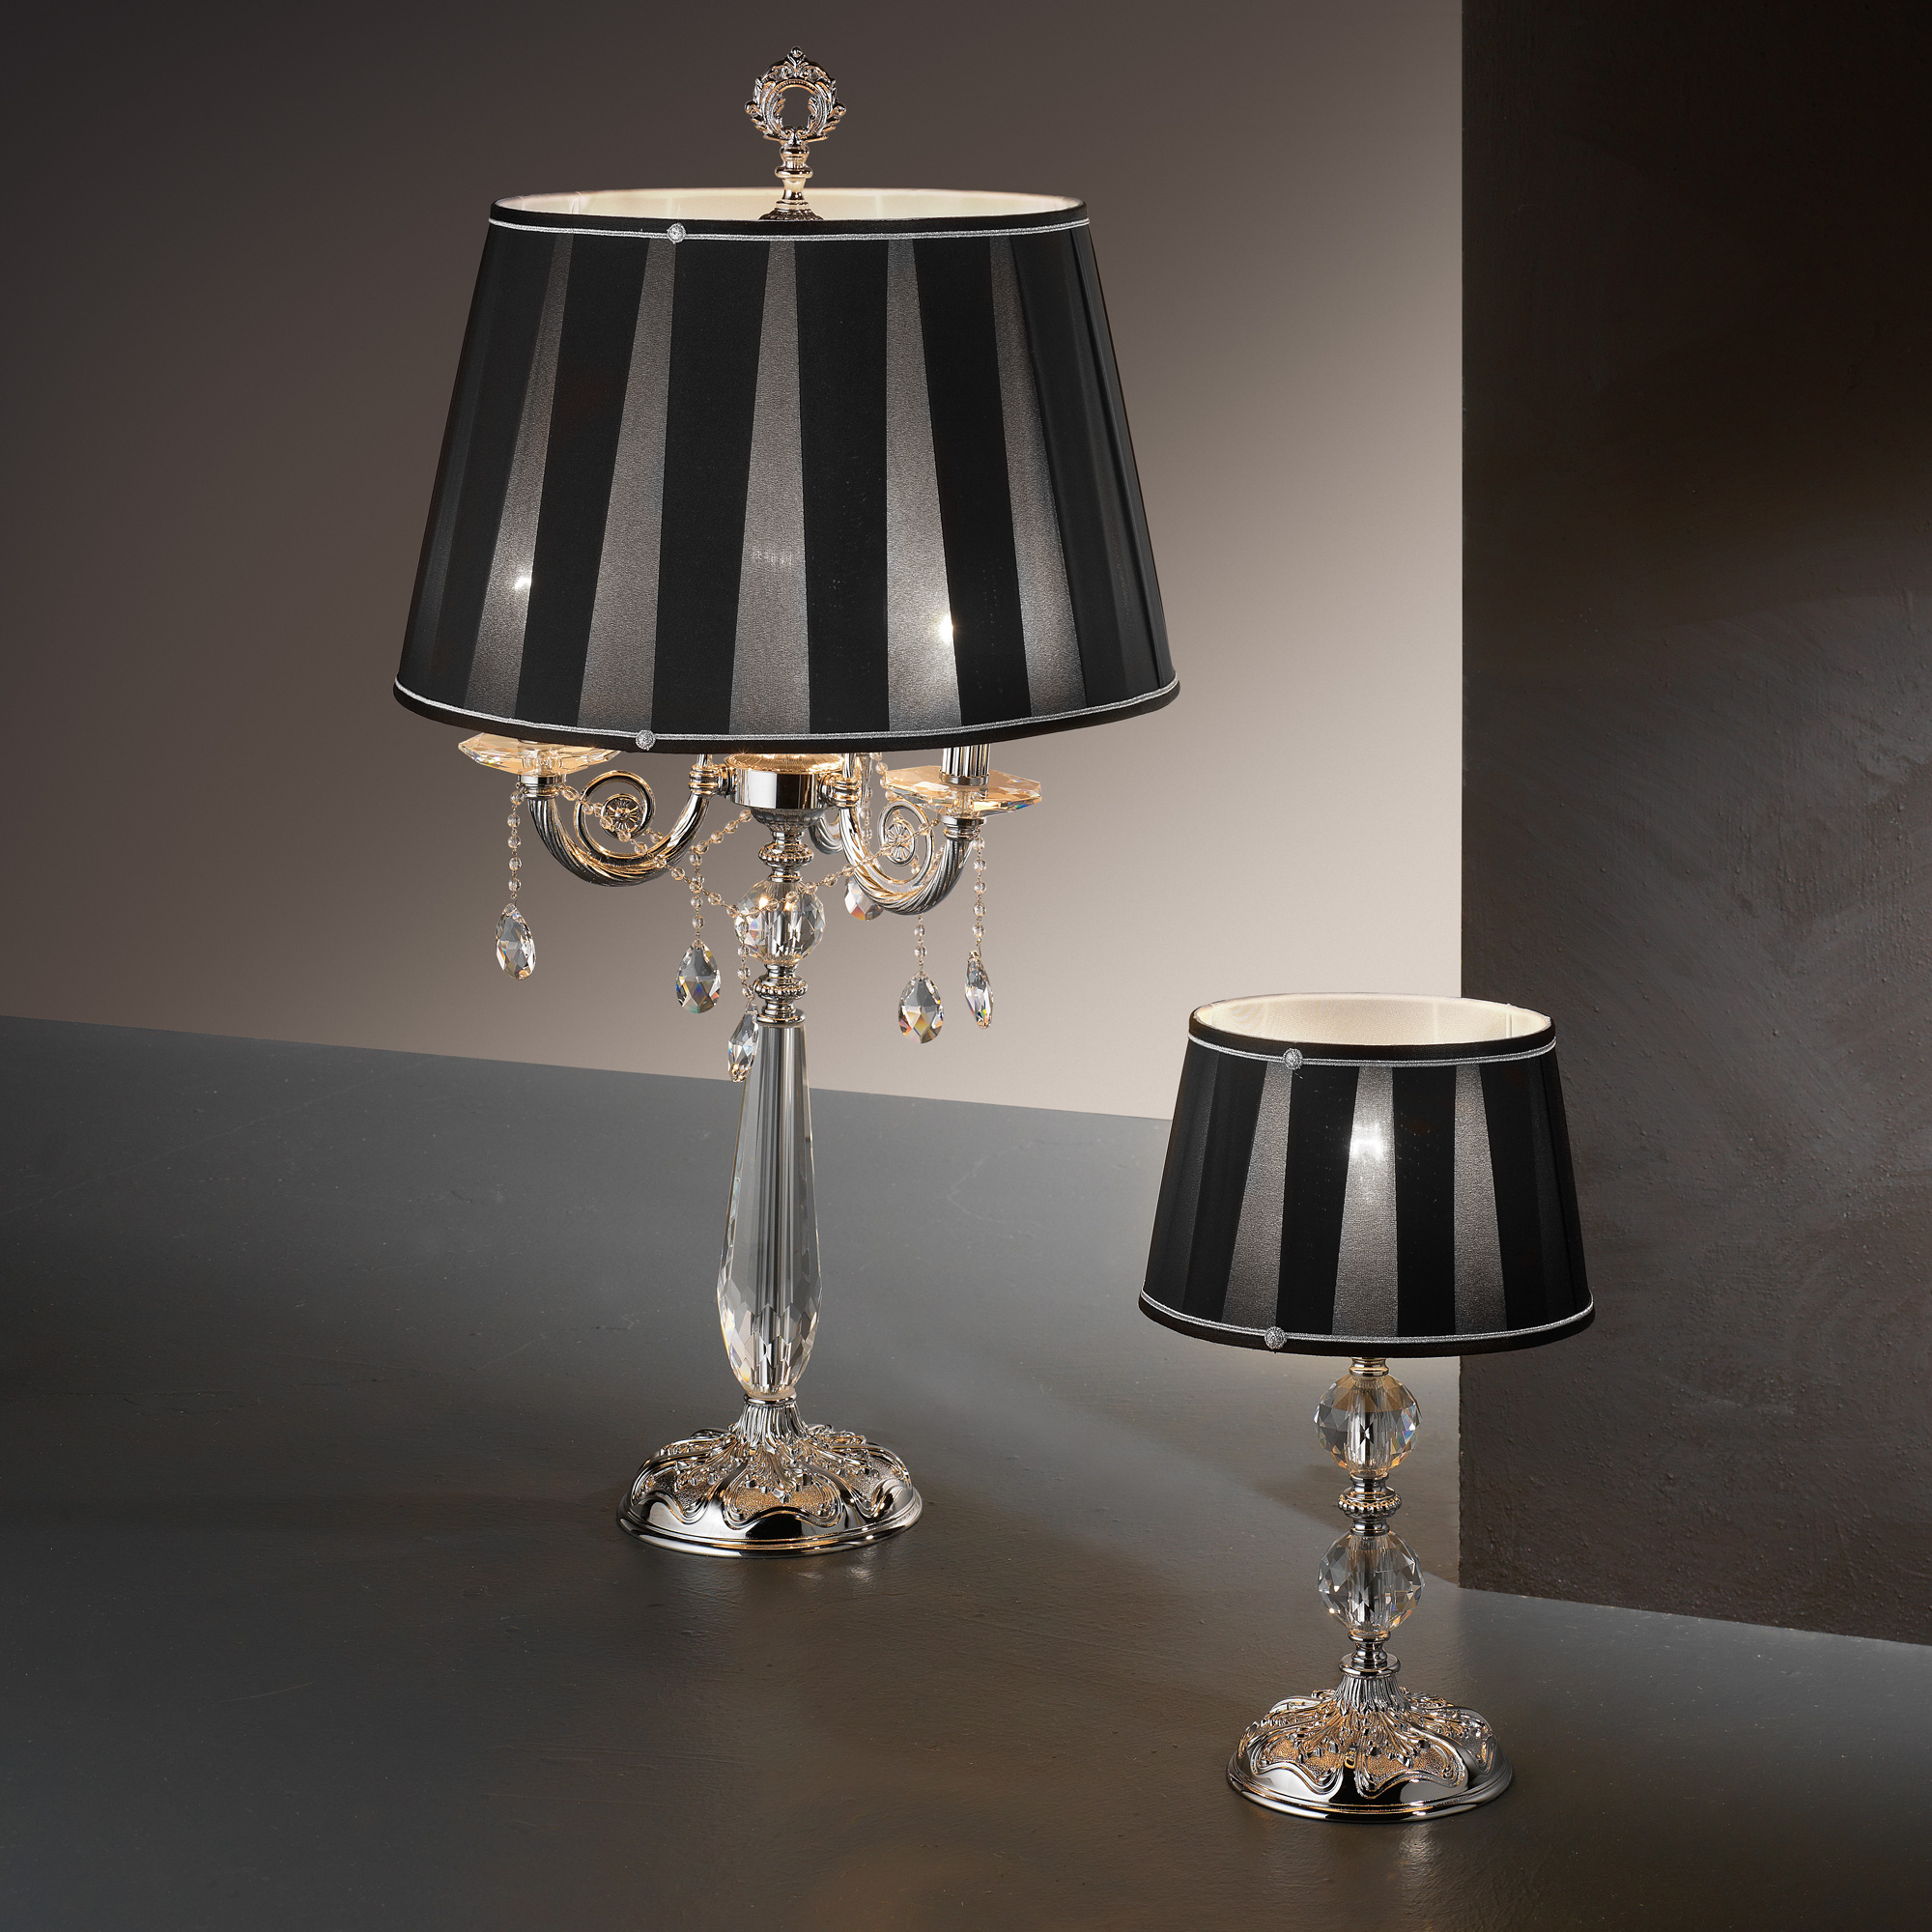 Candelabra Style Table Lamp With Swarovski Crystals